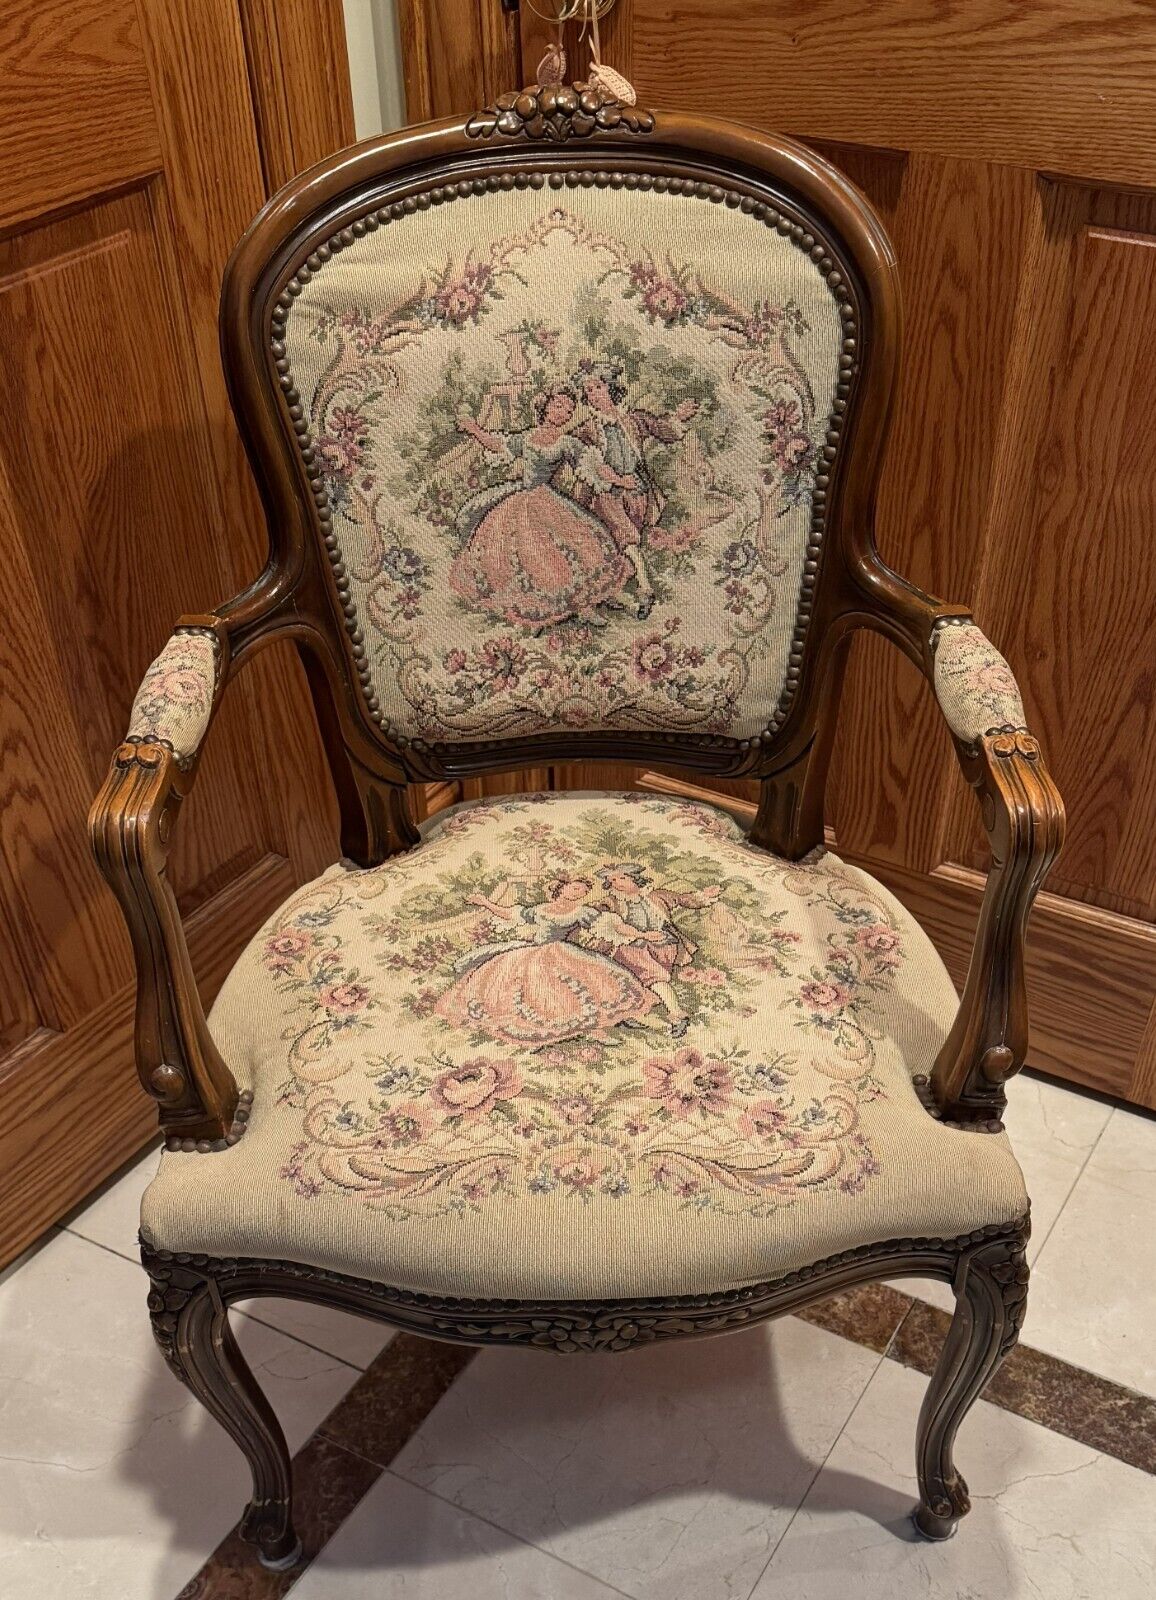 RARE ANTIQUE FRENCH NEEDLEPOINT Chateau D\'Ax Spa French Louis XV Fauteuil Chair